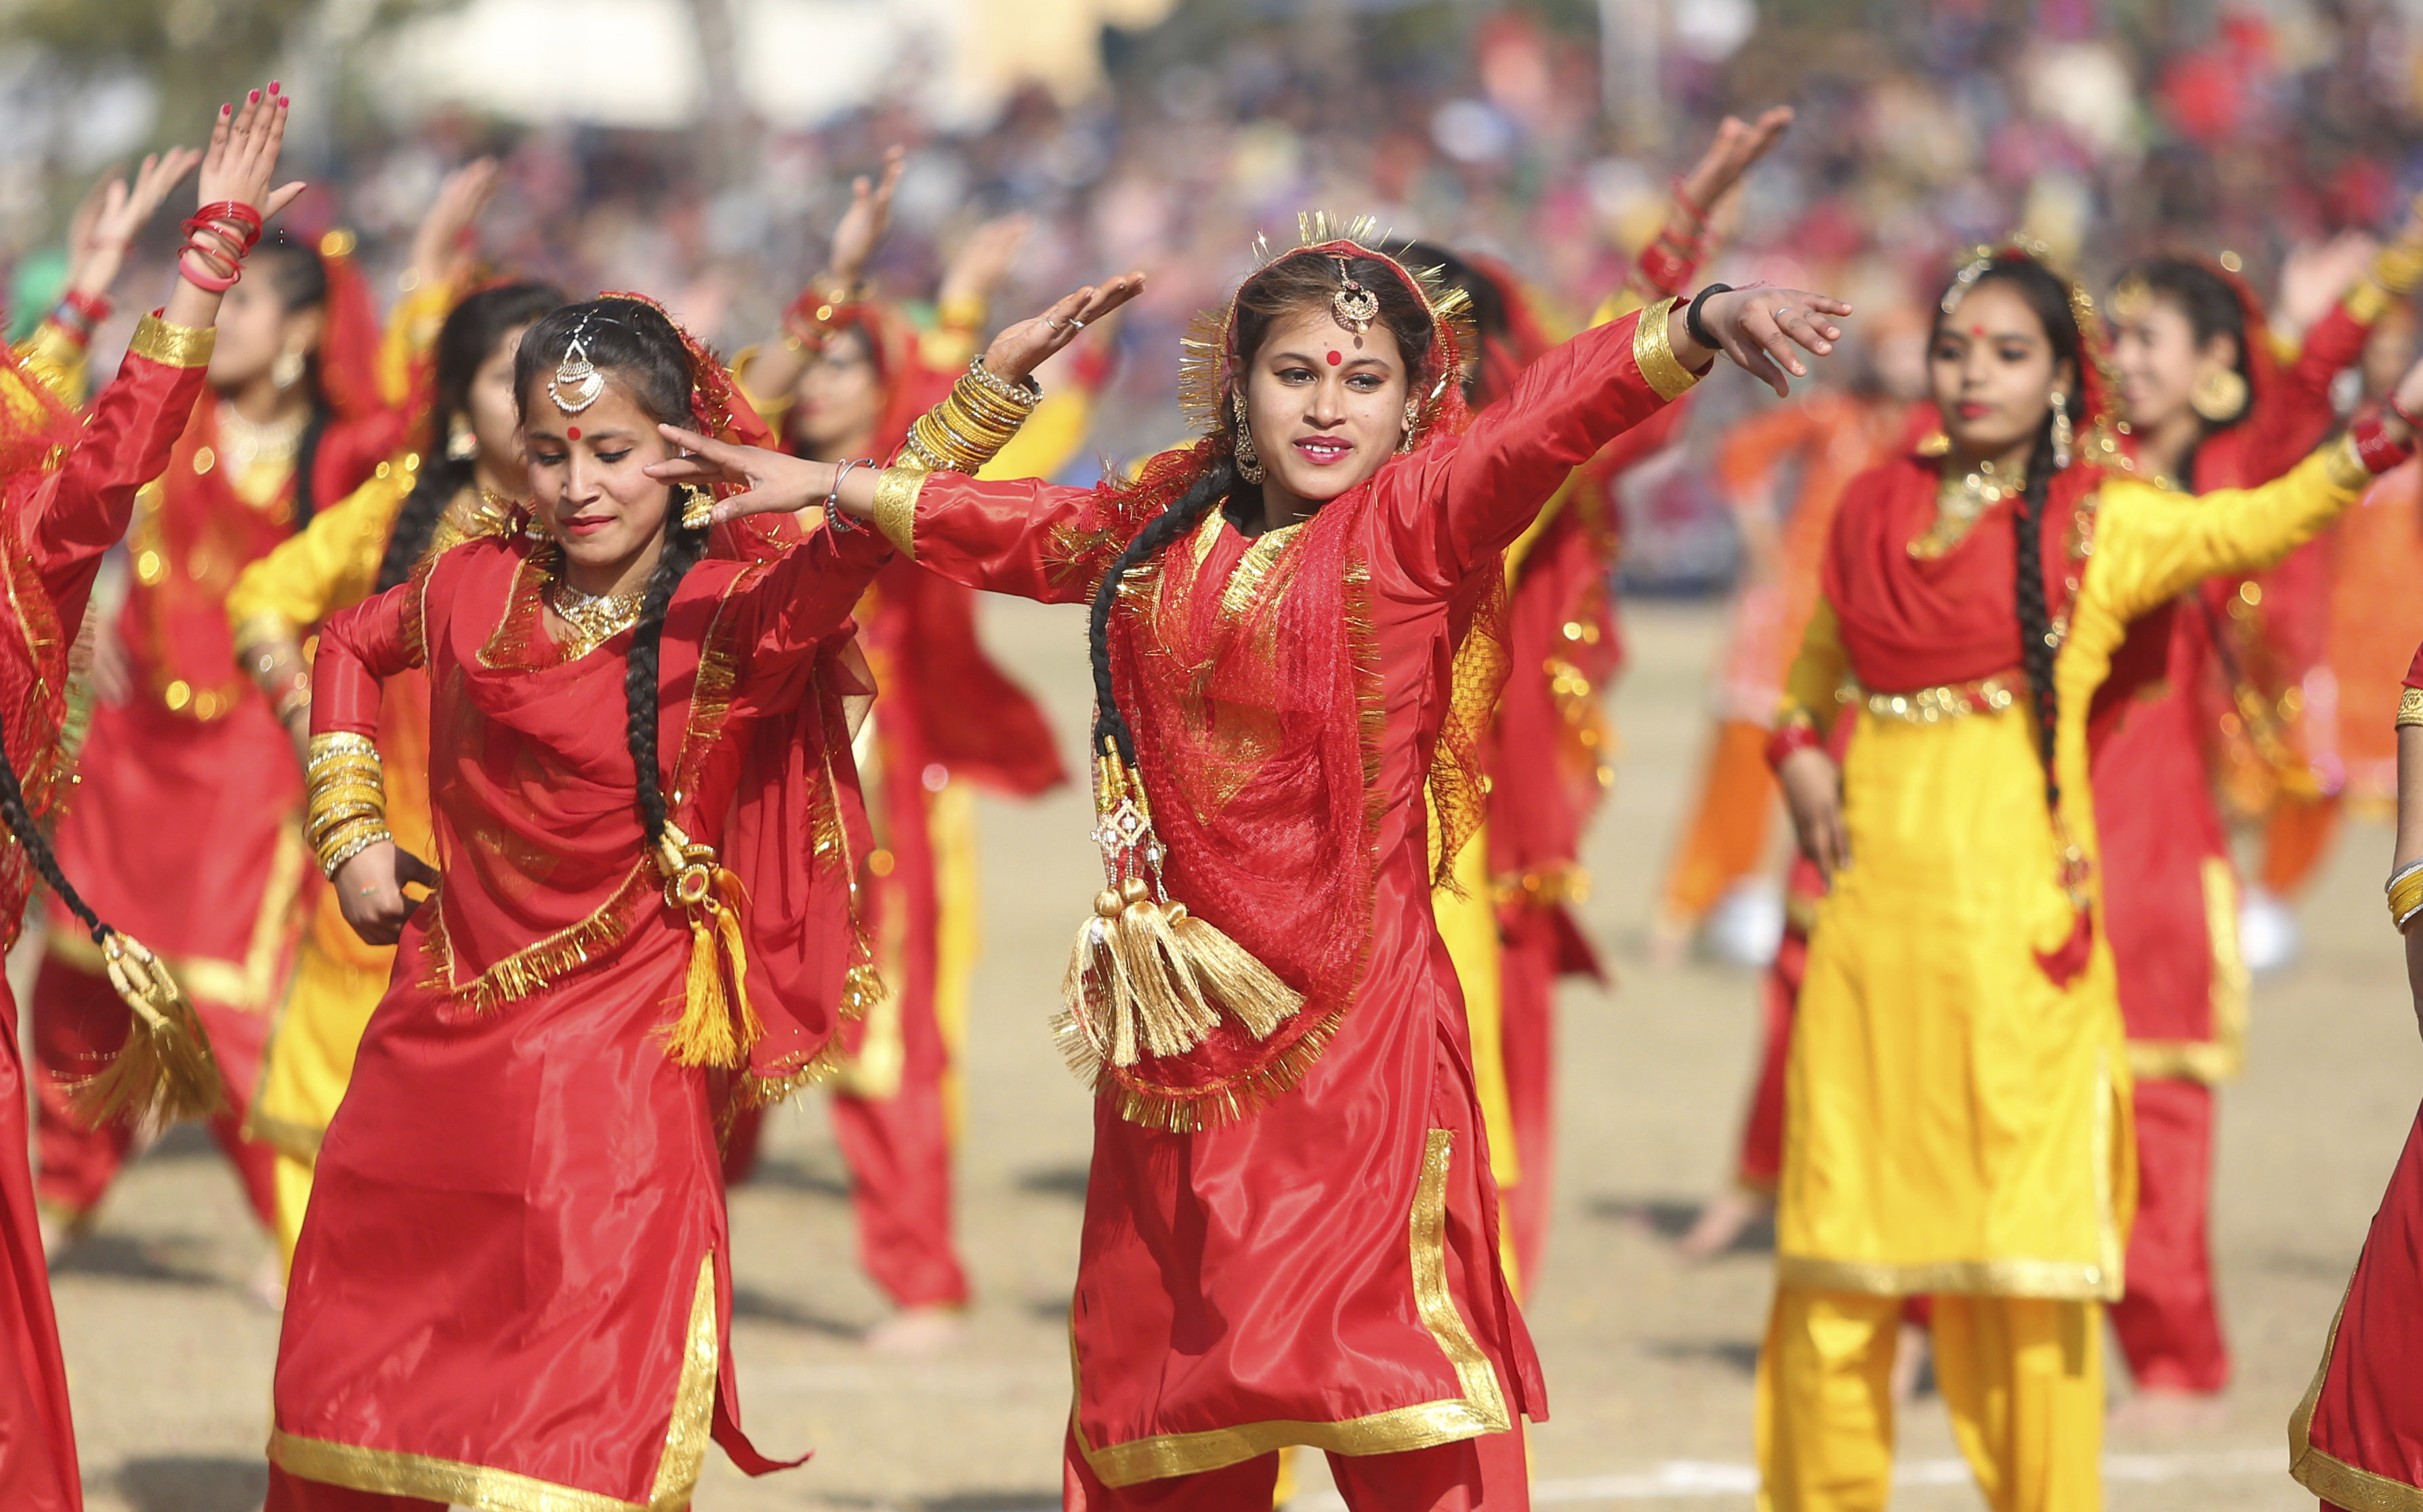 Schoolgirls dance during a celebration of Republic Day parade in Jammu, India, Saturday, Jan. 26, 2019. (AP Photo/Channi Anand)